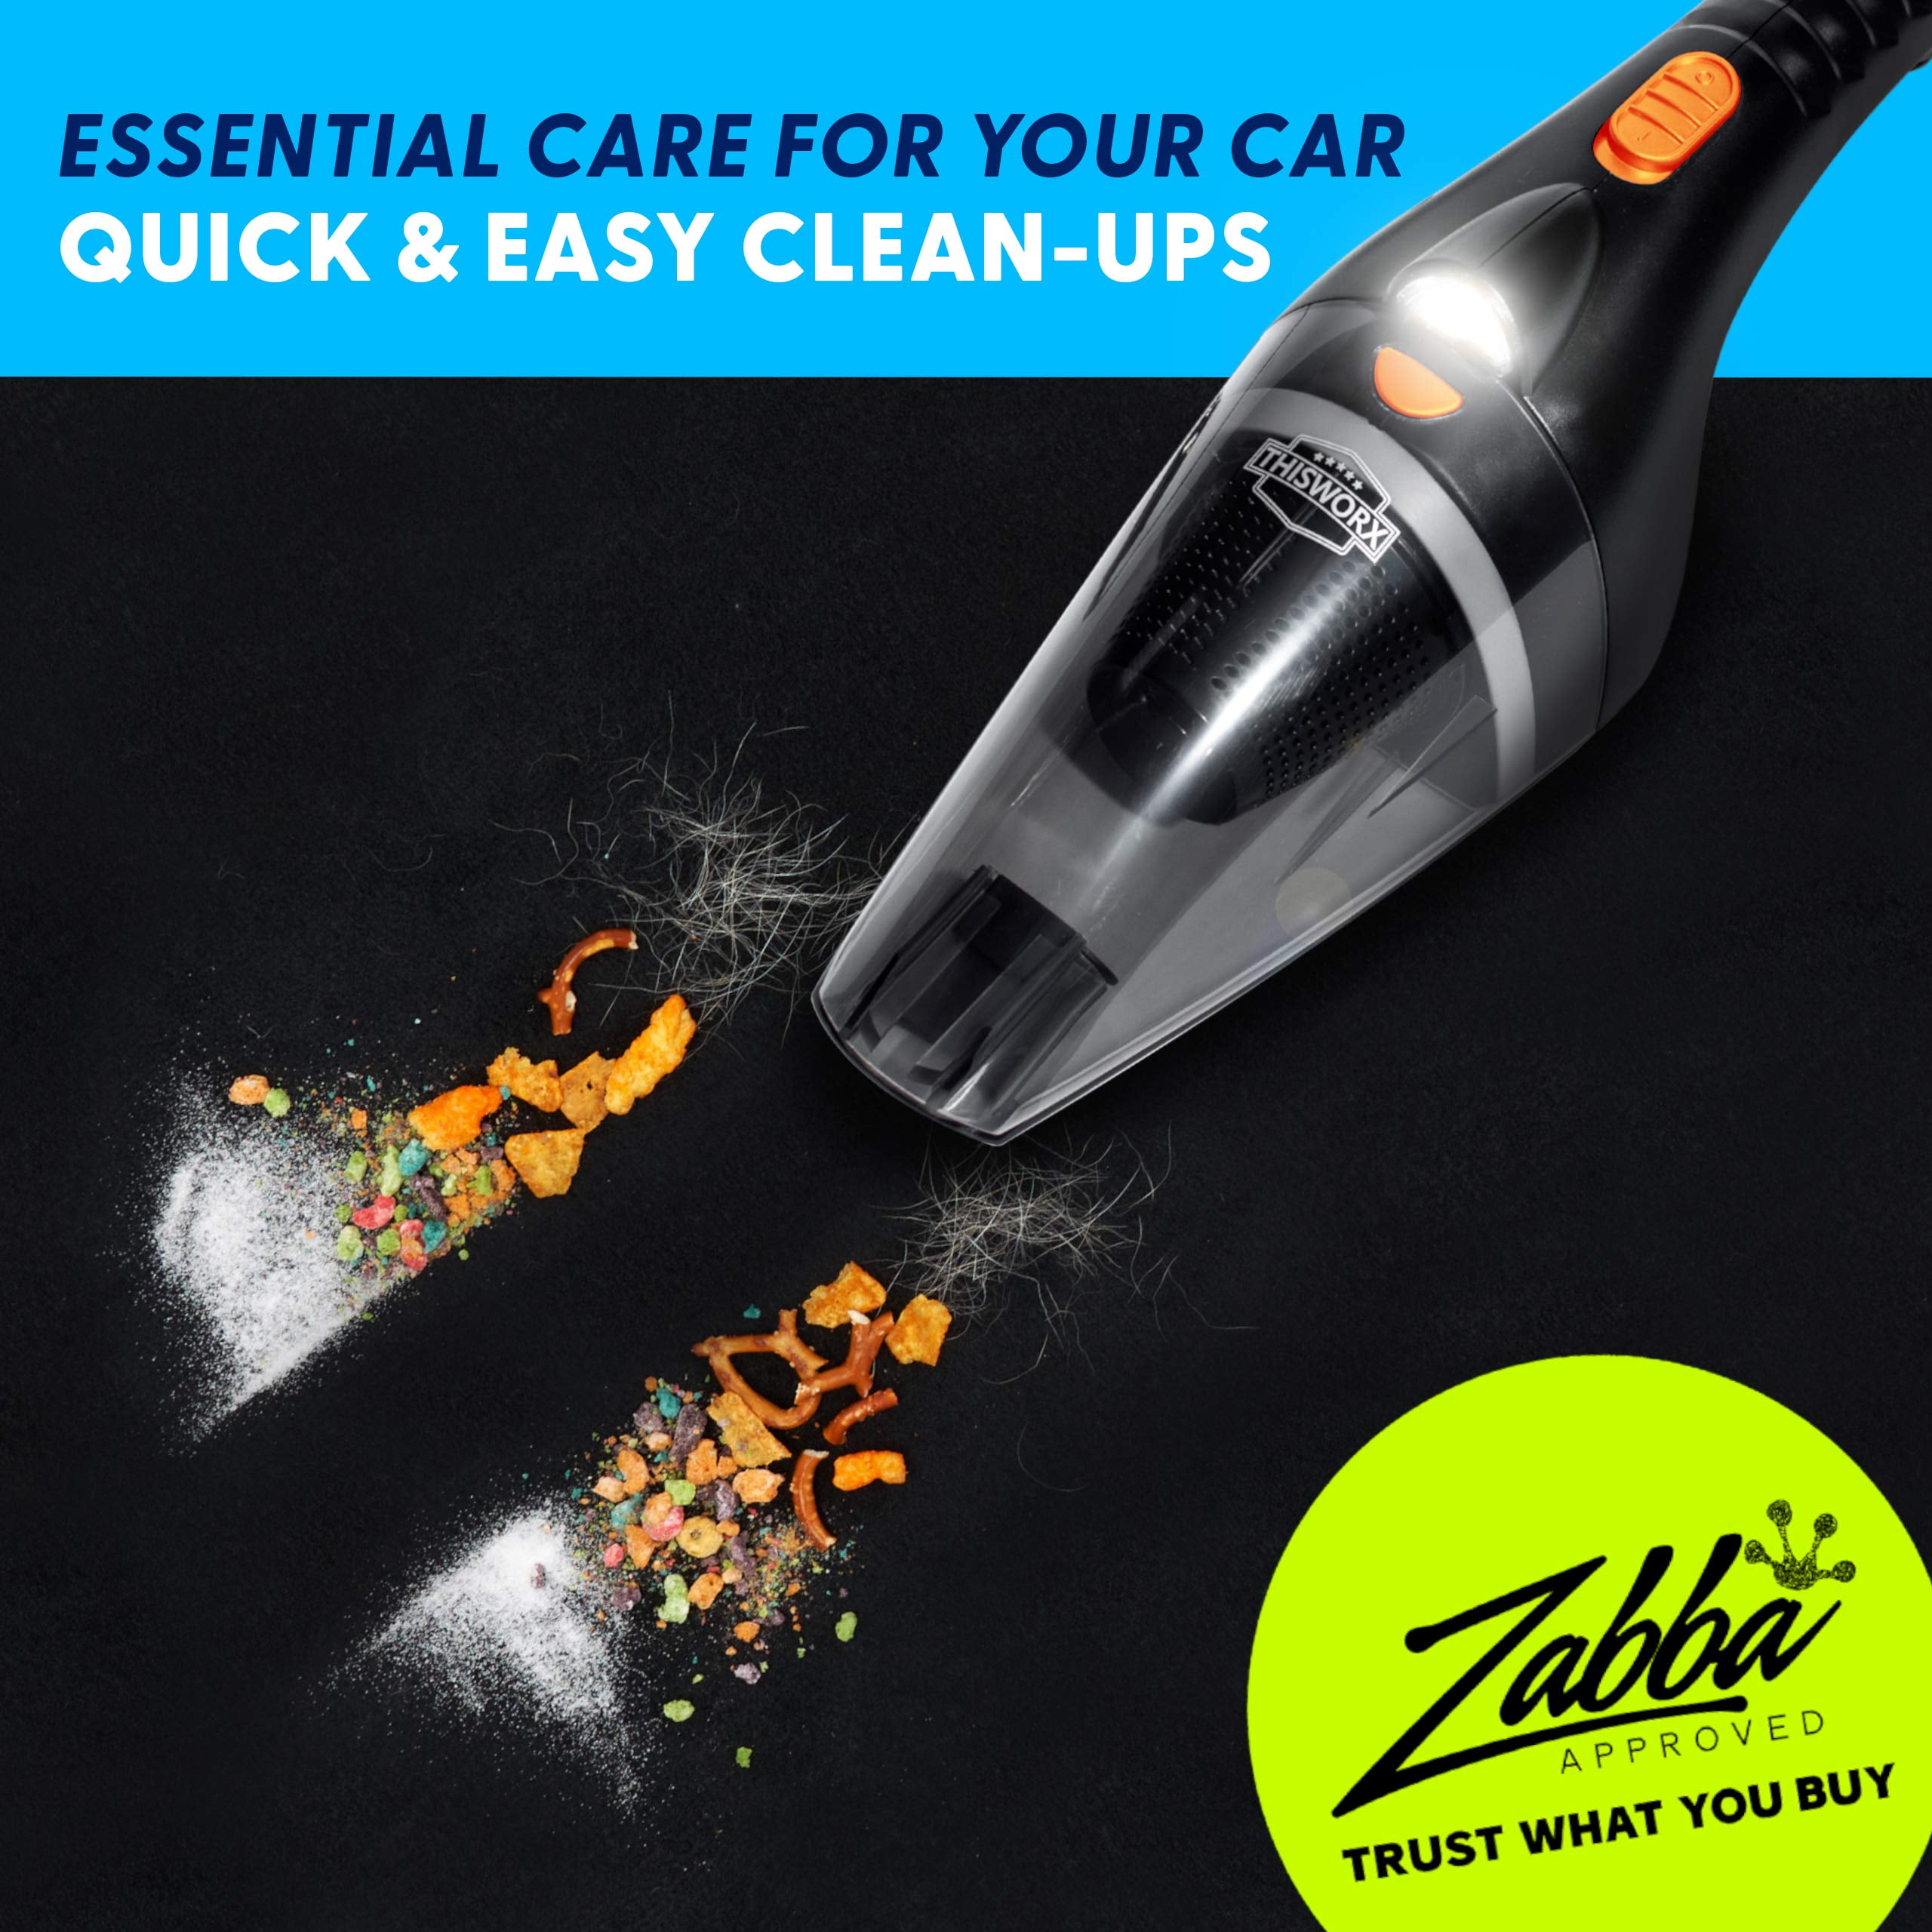 ThisWorx Car Vacuum Cleaner 2.0 - Upgraded w/ LED Light, Double HEPA  Filter, 110W High Suction Power